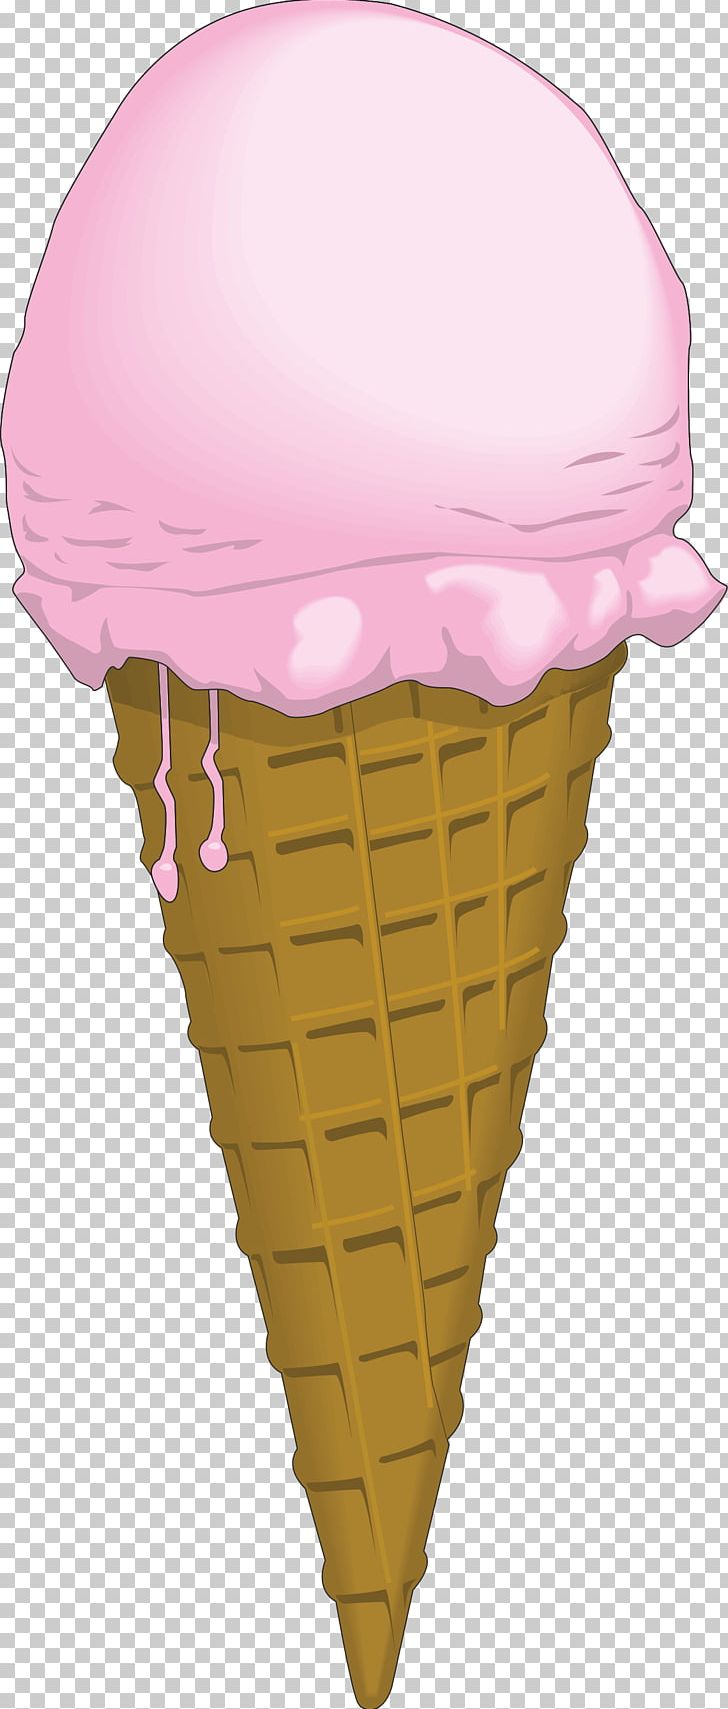 Ice Cream Supply And Demand Economics Price Goods PNG, Clipart, Dairy Product, Demand, Demand Curve, Dessert, Dondurma Free PNG Download